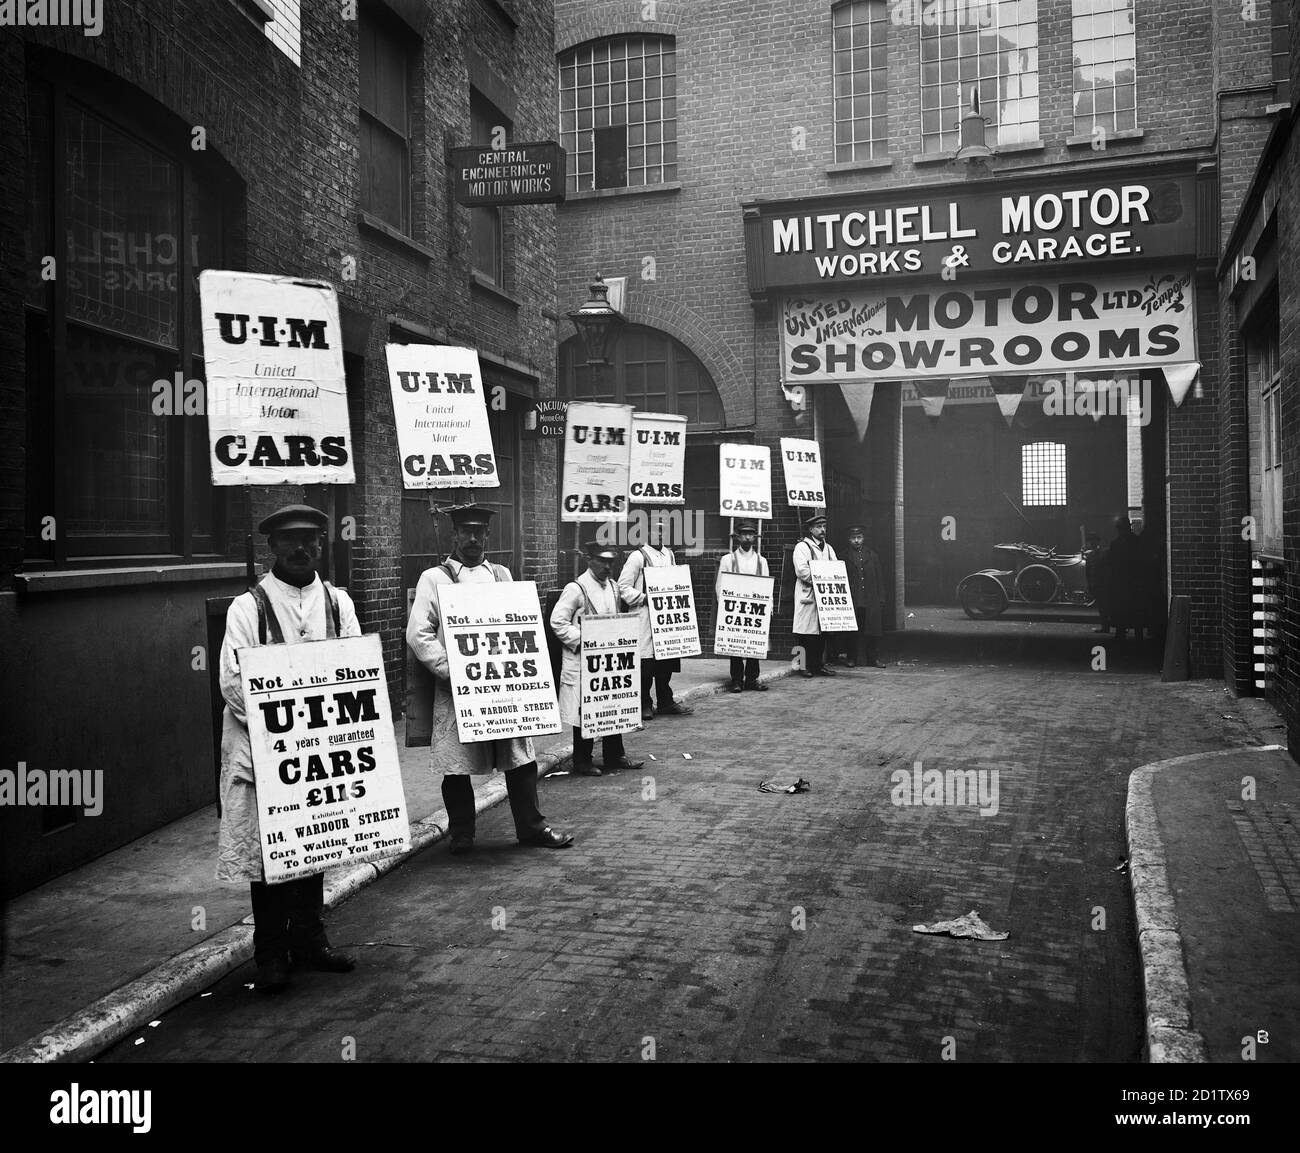 WARDOUR STREET, London. A line of men standing outside Mitchell Motors Company (114 Wardour Street), wearing sandwich boards advertising United International Motors Ltd. At the time the photograph was taken the garage was being used as a temporary motor showroom. Photographed by Bedford Lemere & Co in October-November 1910. Stock Photo